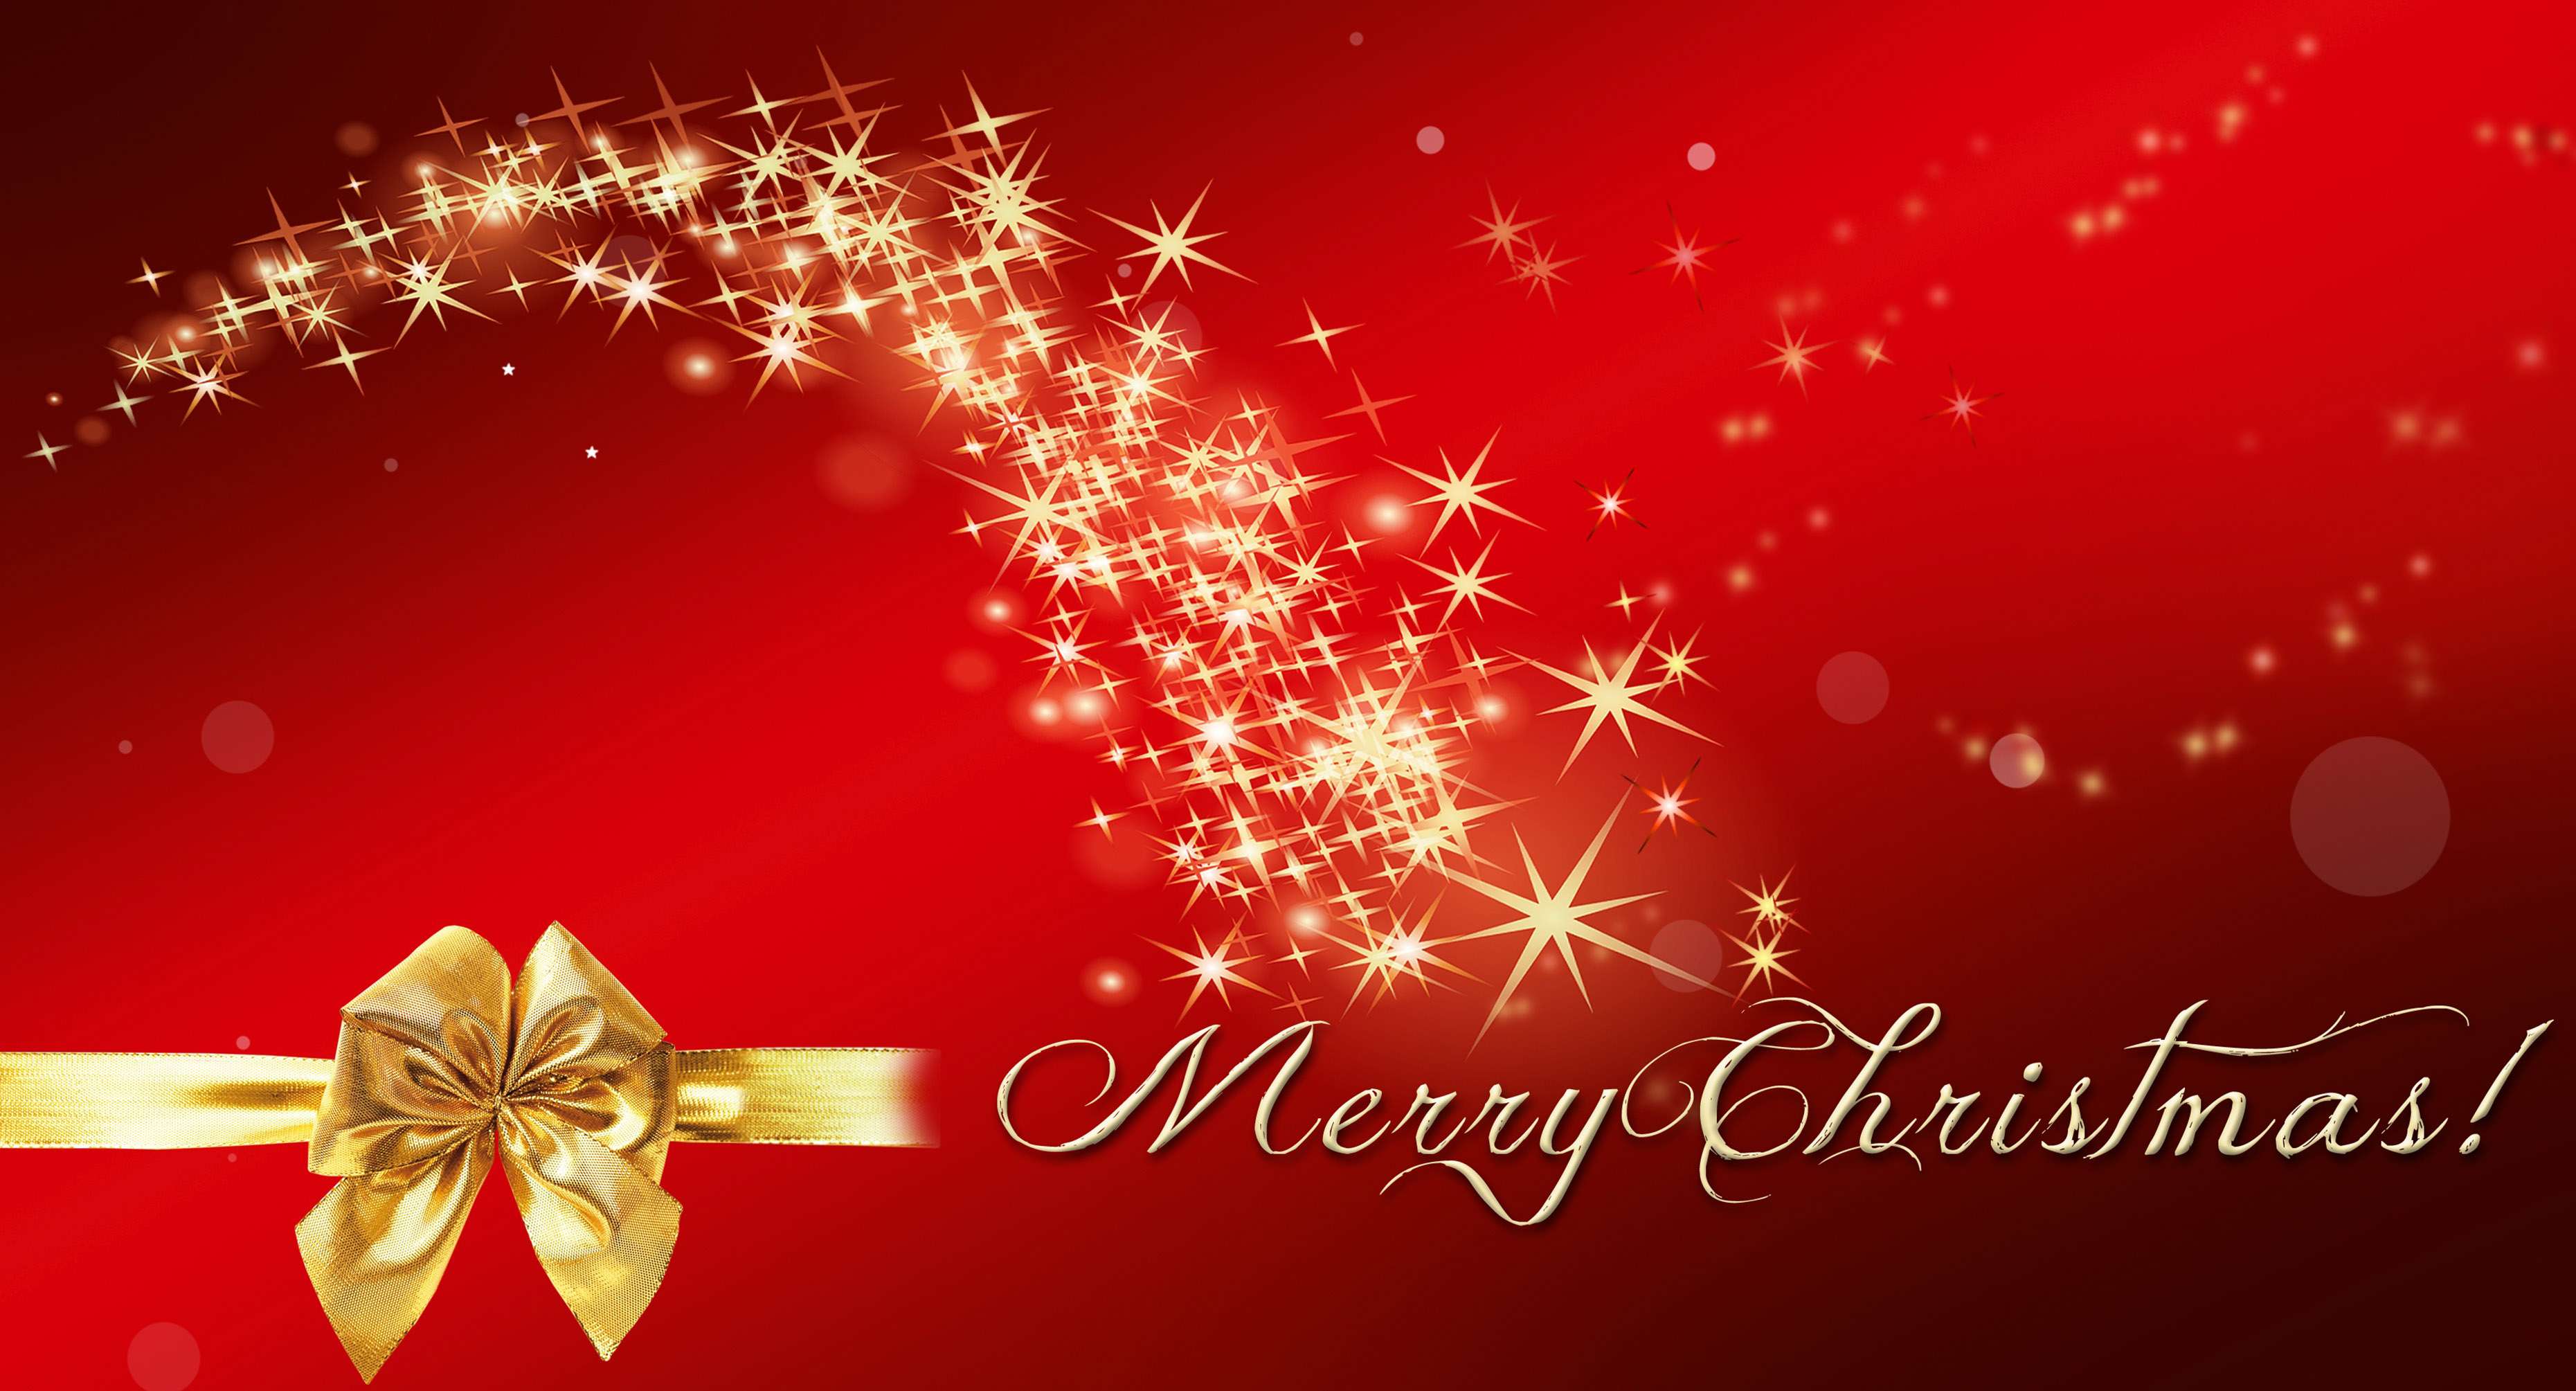 Merry Christmas Wallpaper Red And Gold